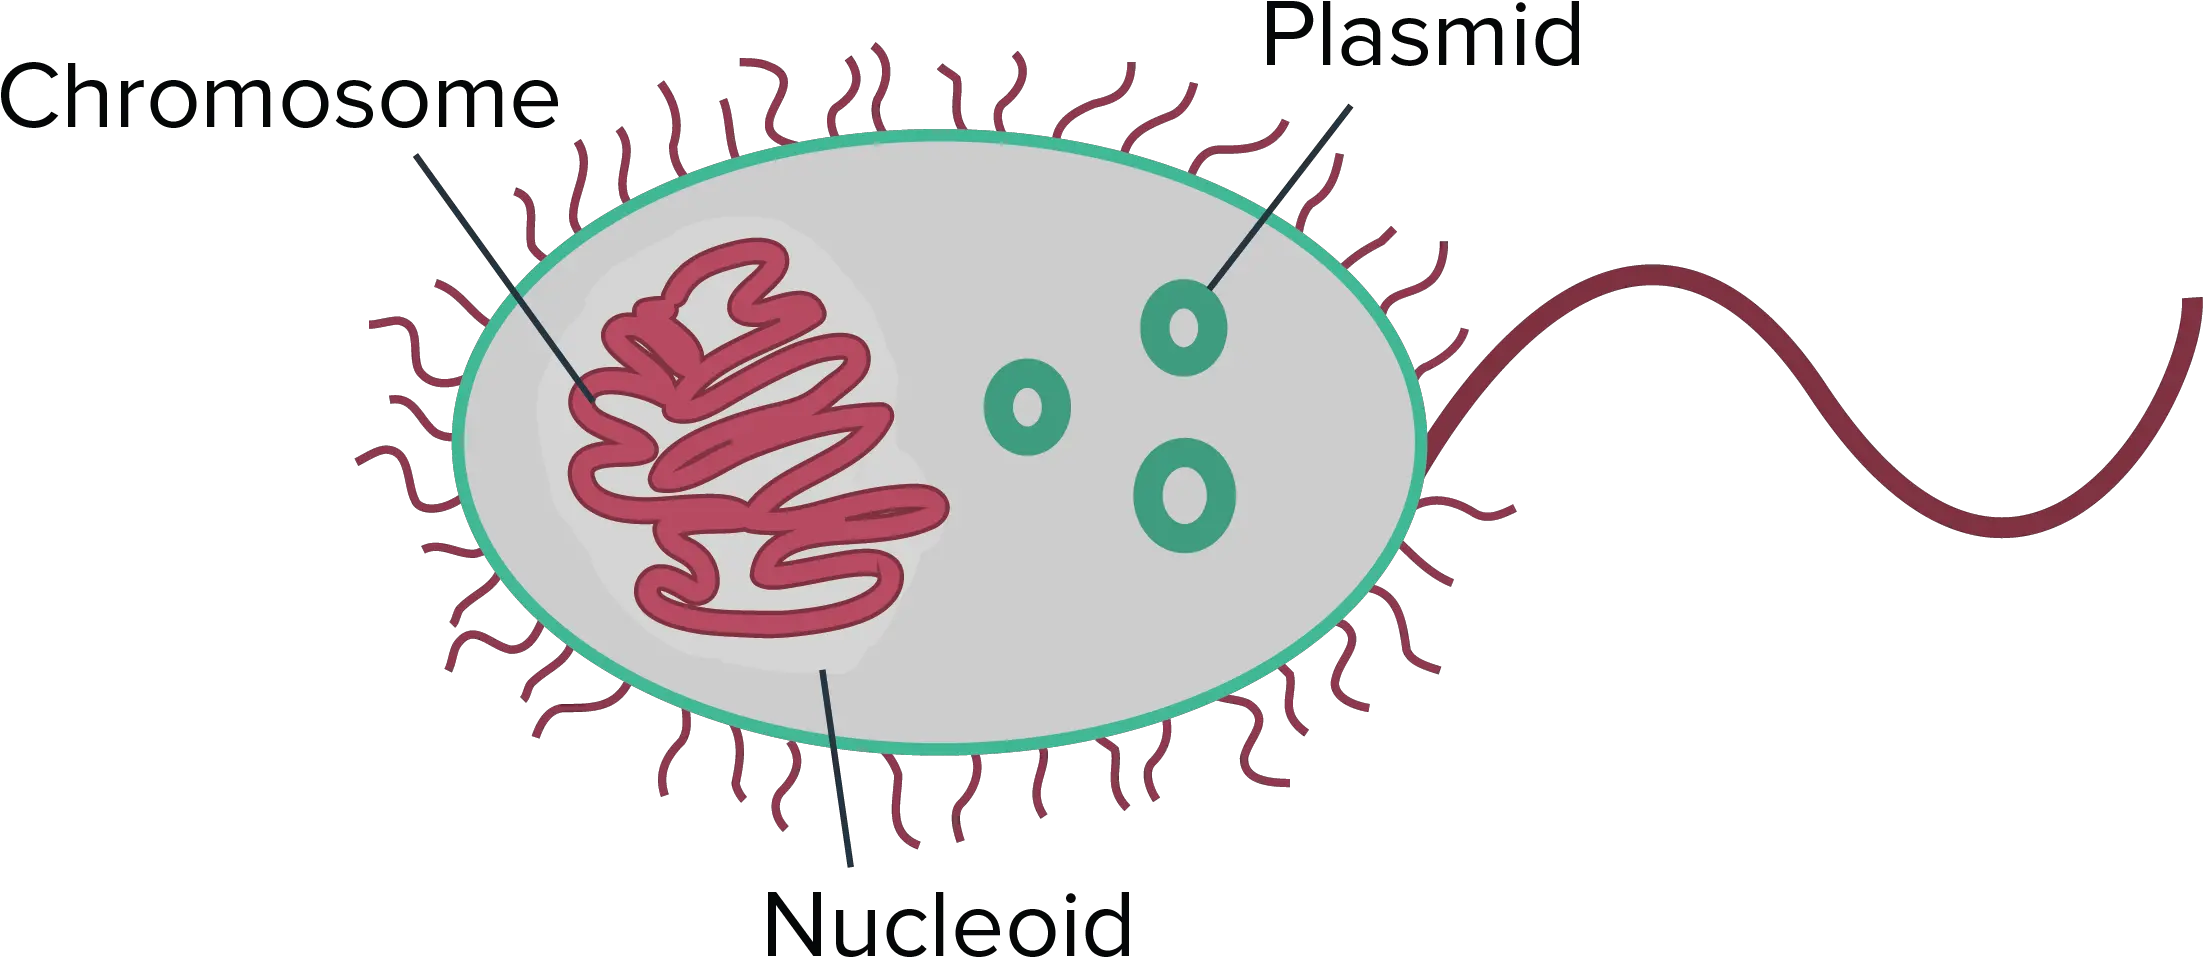 Bacteria Png Single Bacteria Cell Gcse Unlabelled Dna In Prokaryotes Bacteria Png